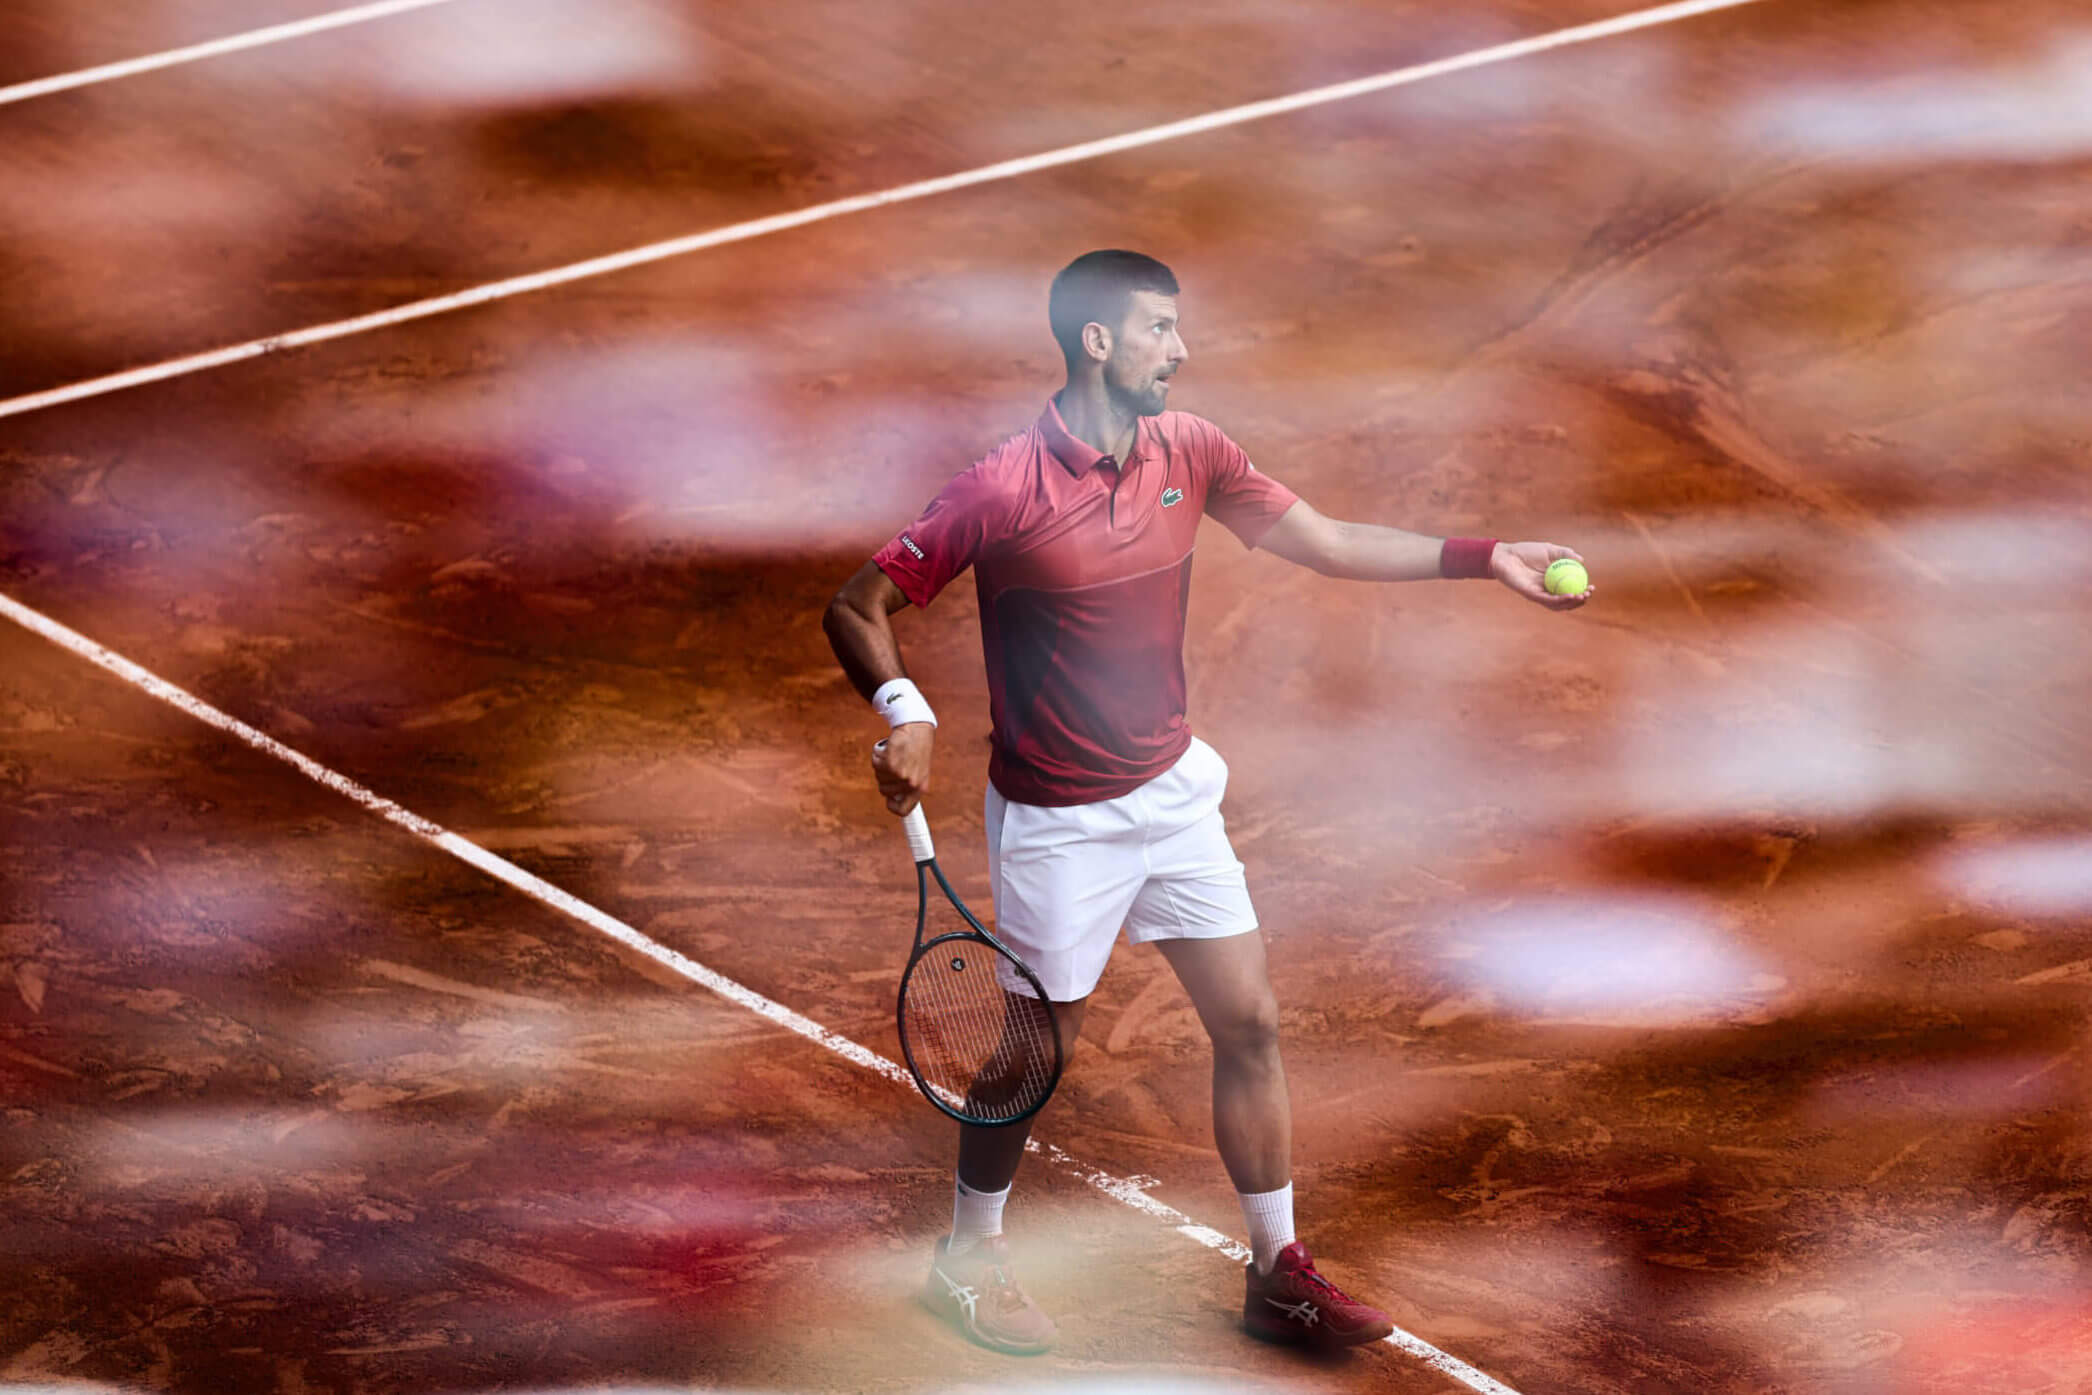 Novak Djokovic's knee injury and withdrawal from the French Open: what it means